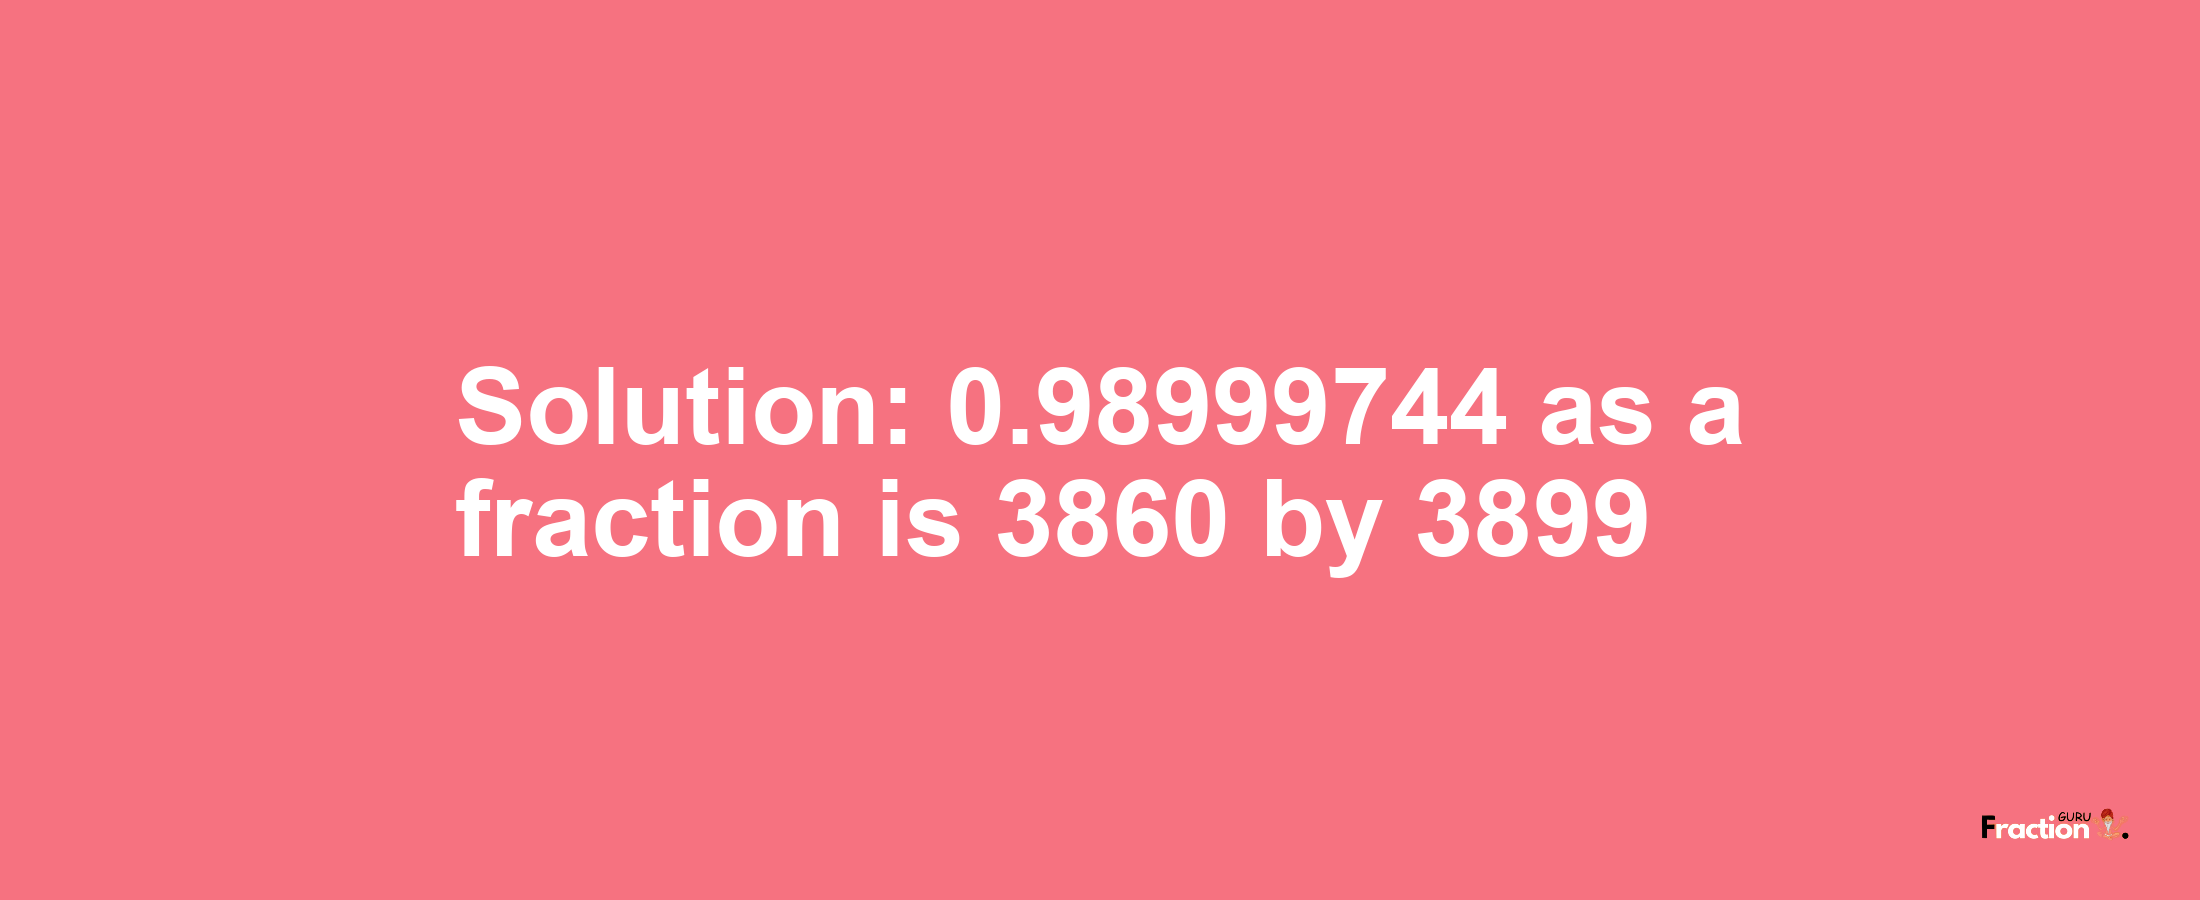 Solution:0.98999744 as a fraction is 3860/3899